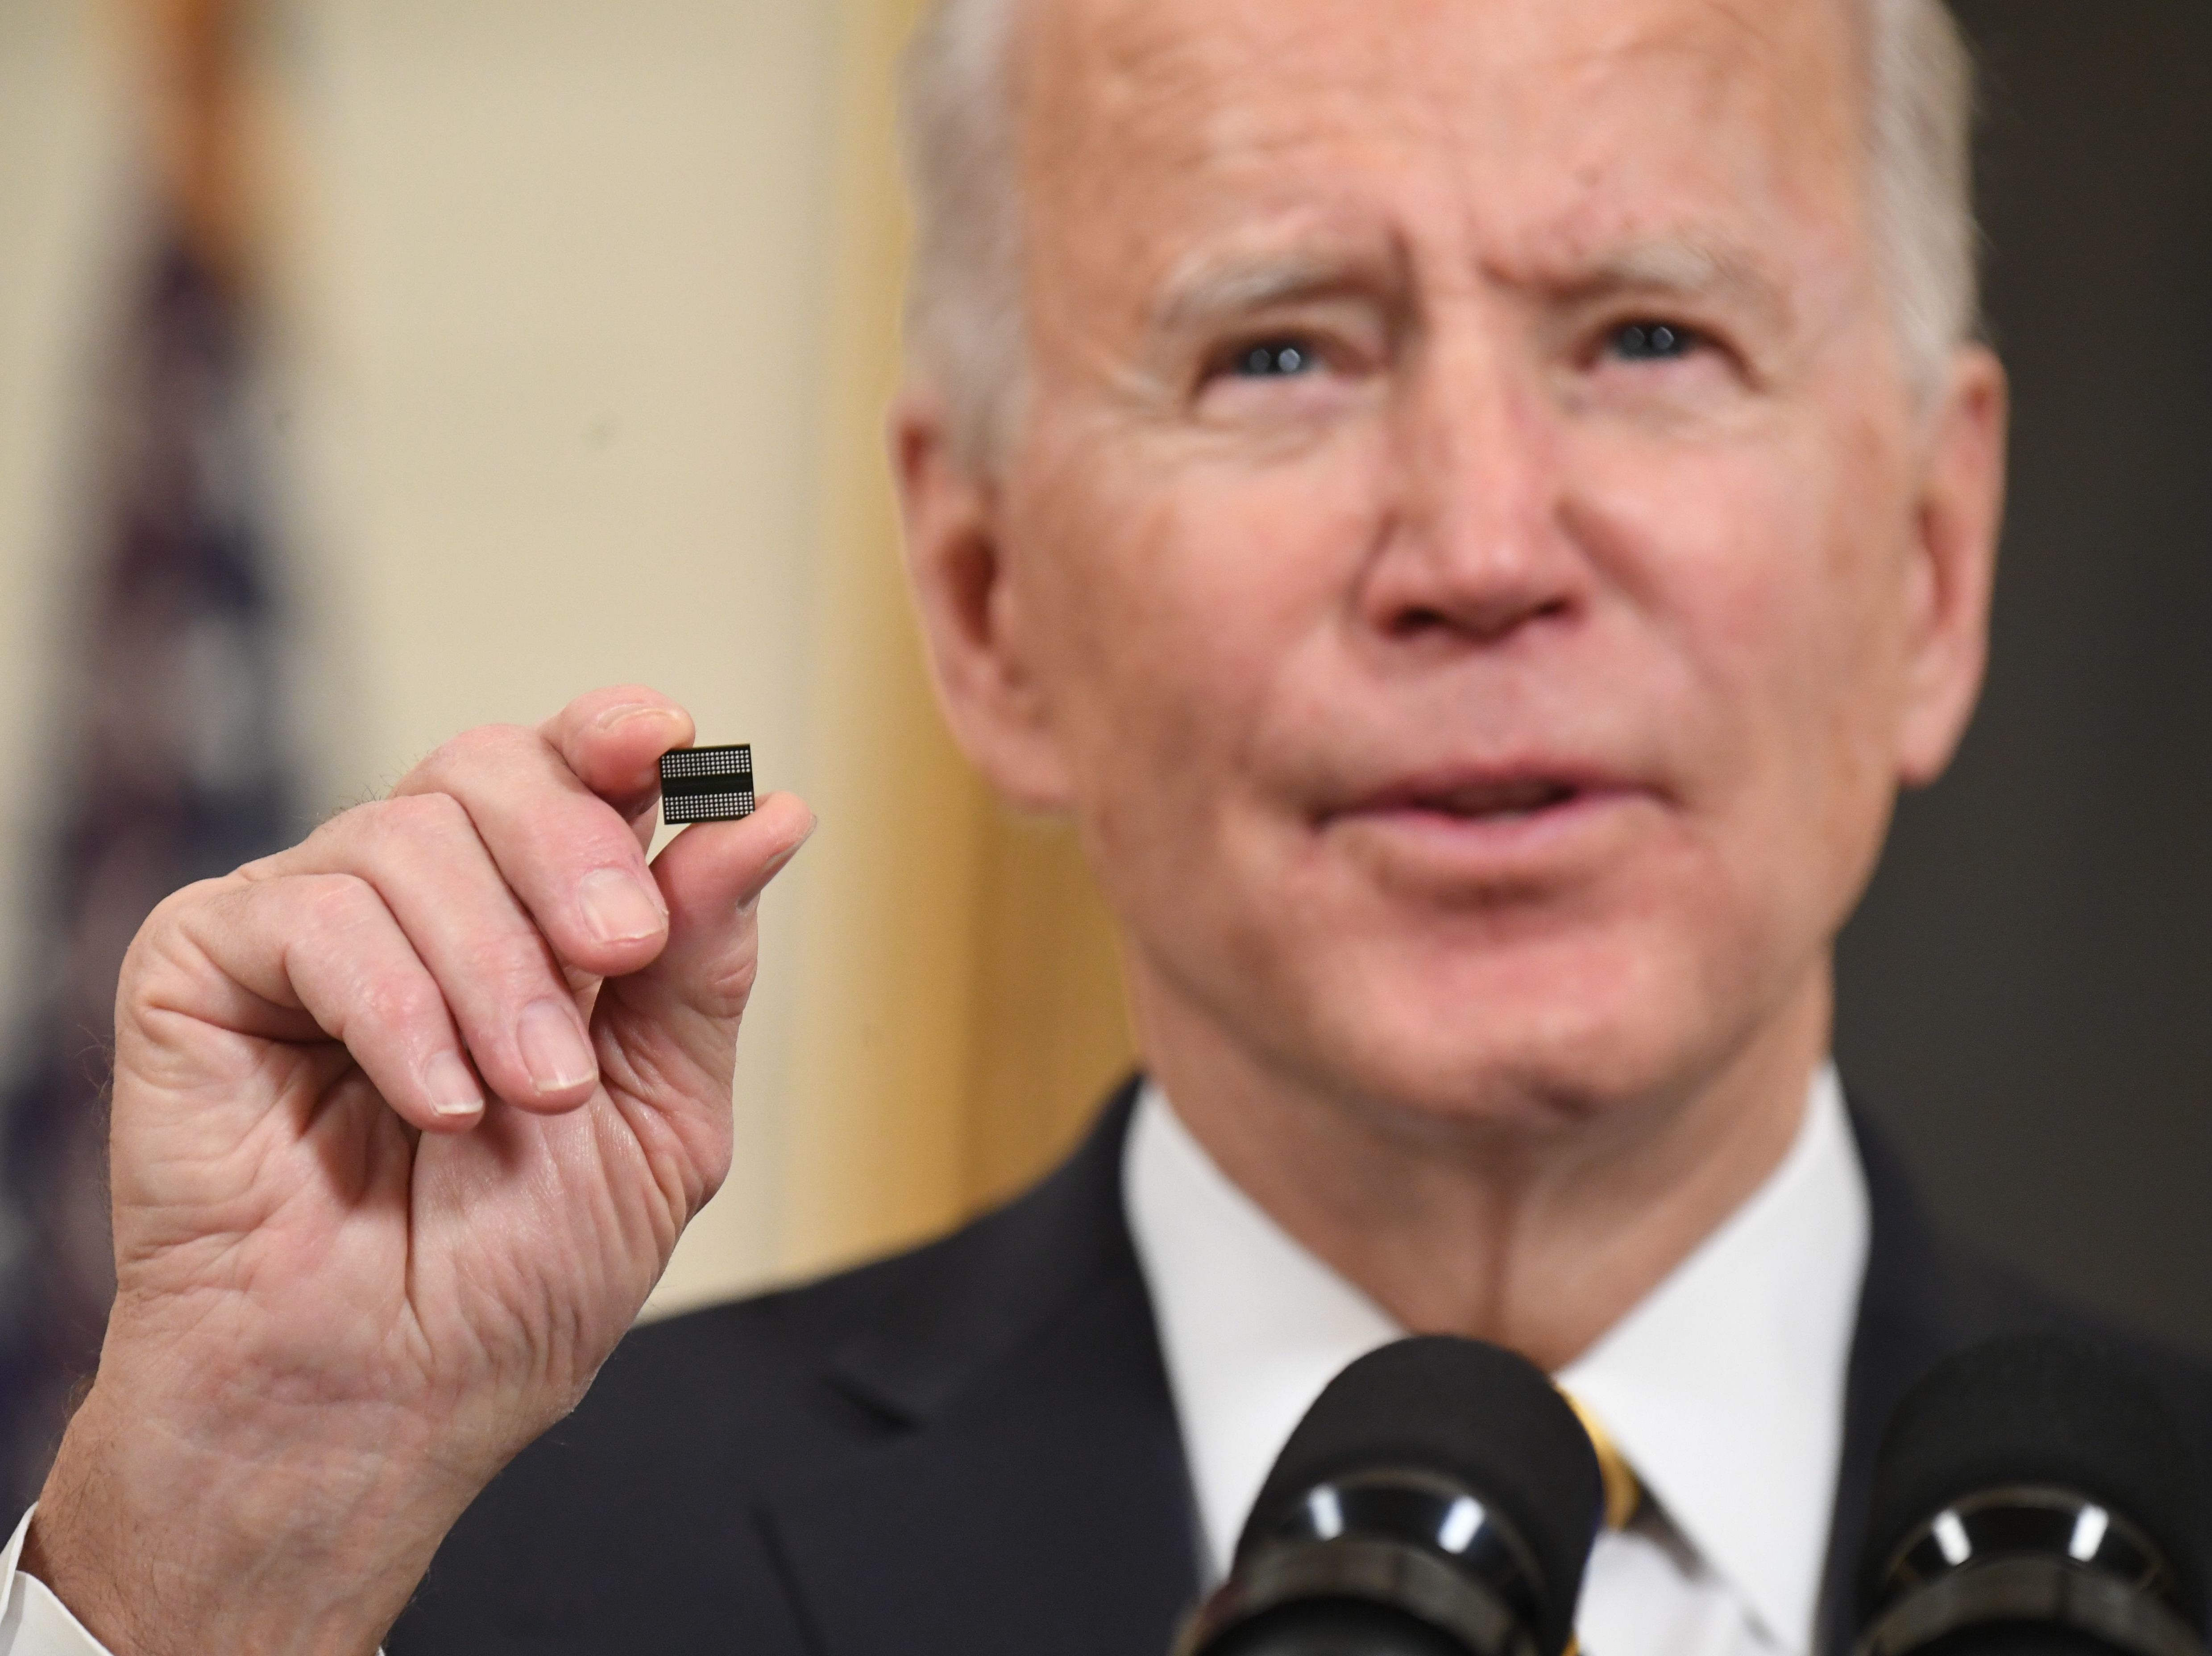 President Biden holds a microchip before signing an executive order on securing critical supply chains in February. A shortage of chips after a surge in demand hampered key sectors such as carmakers.